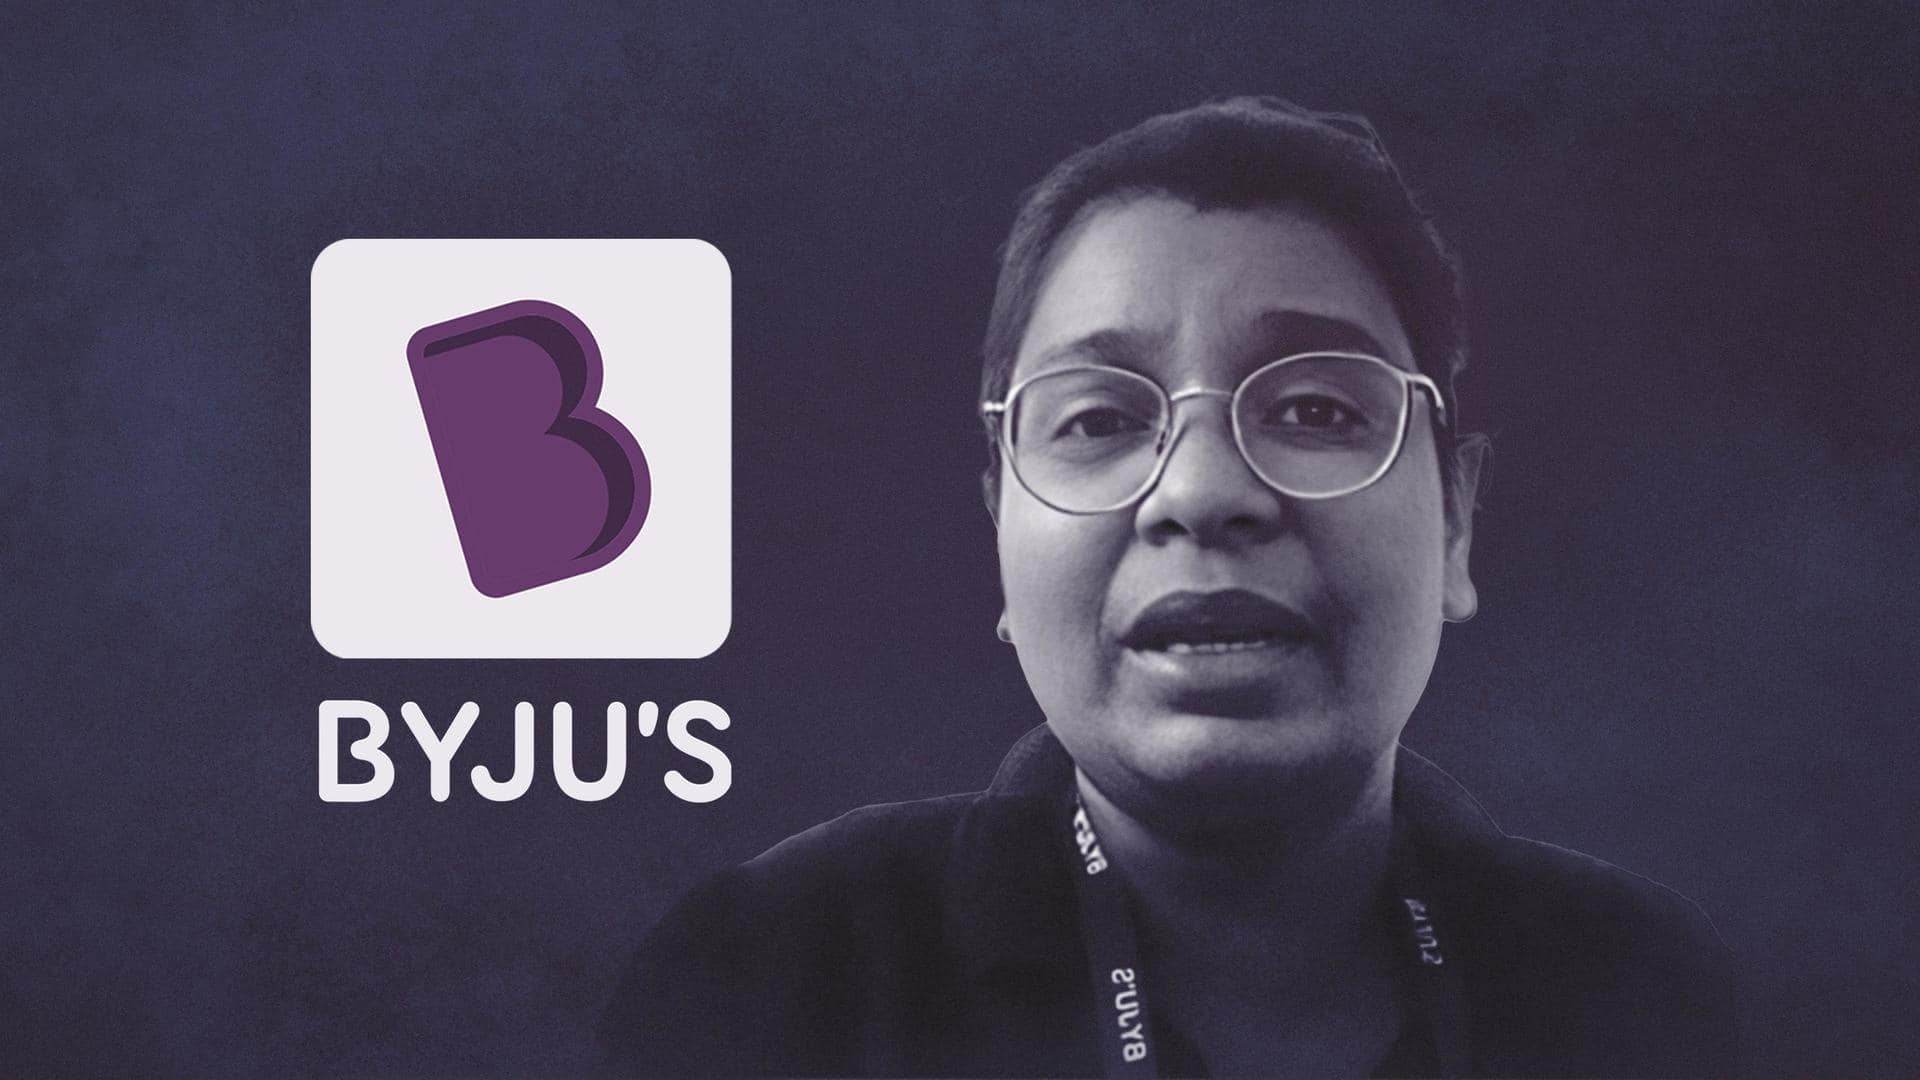 Ex-BYJU'S employee cries, seeks government's assistance over 'toxic' work culture